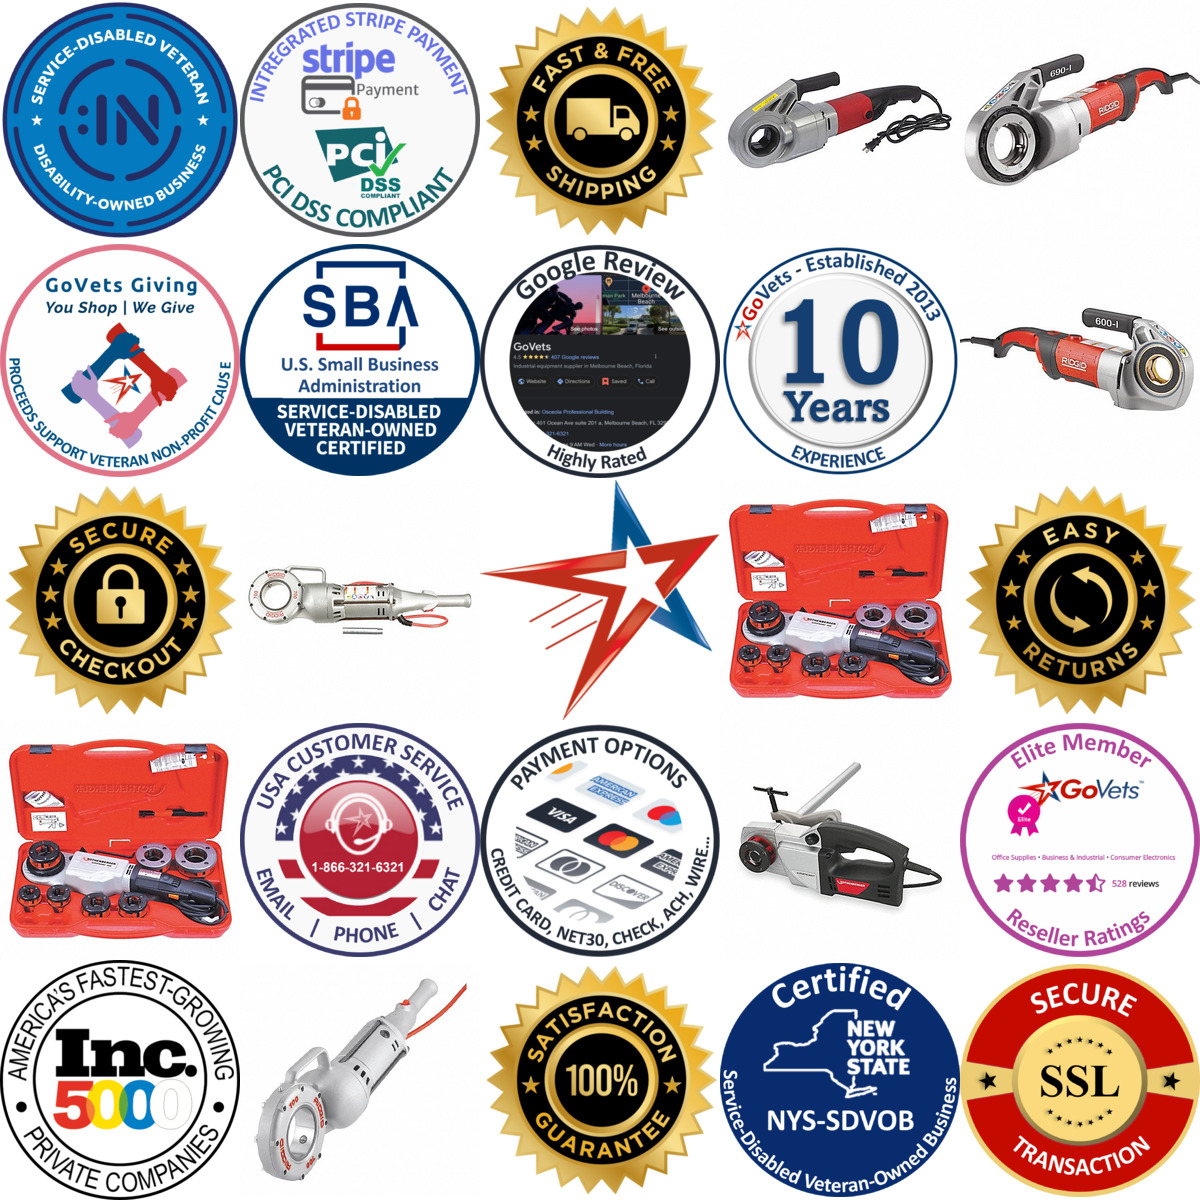 A selection of Corded Handheld Pipe Threading Machines products on GoVets